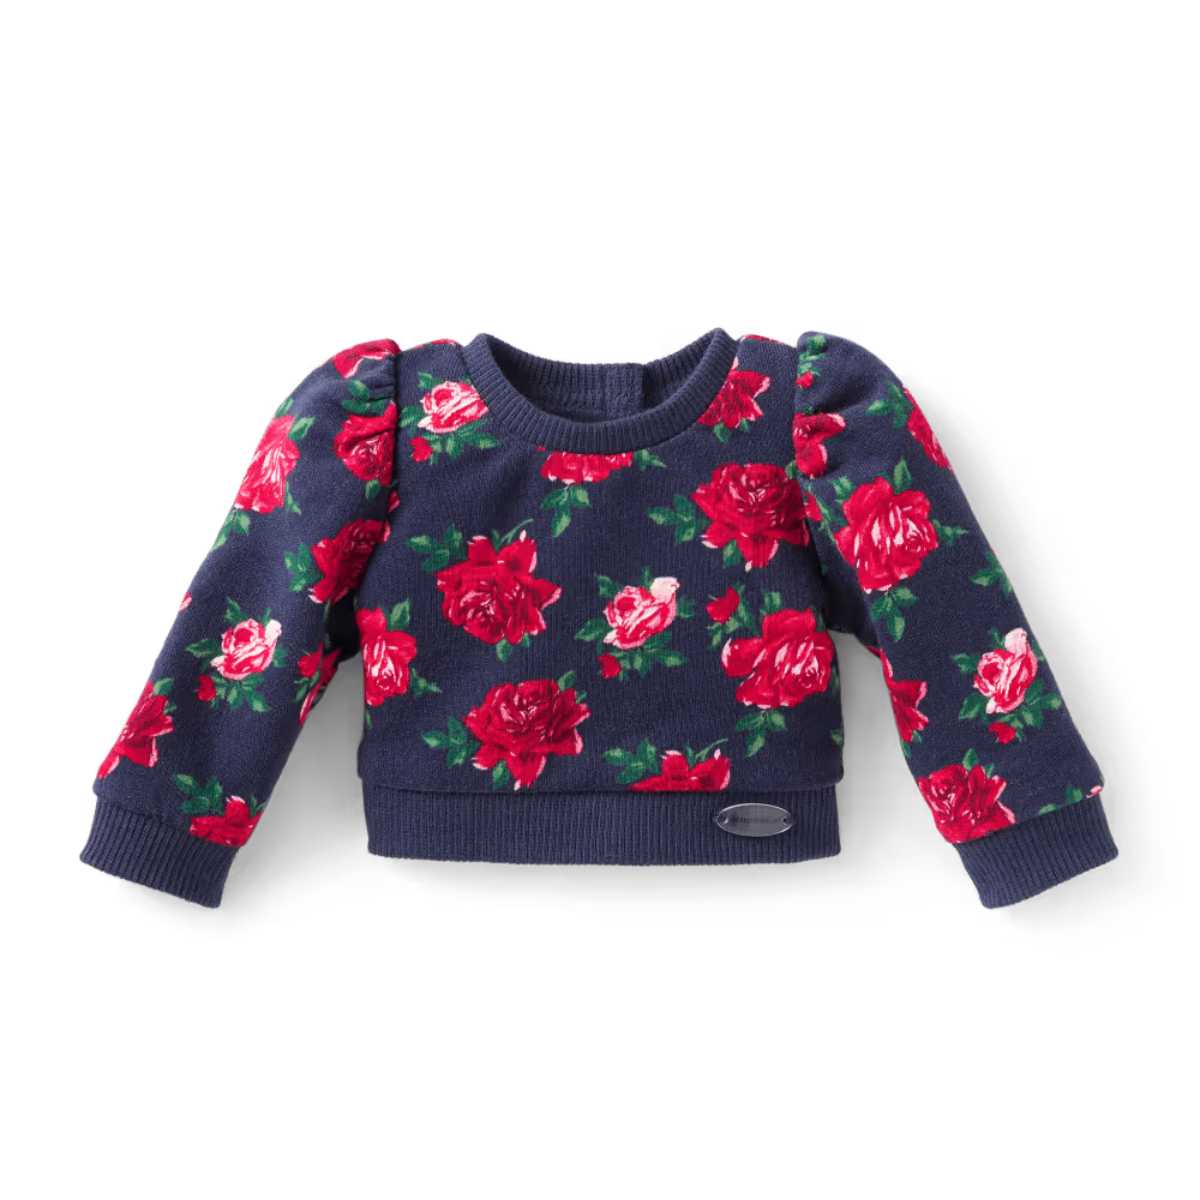 American Girl x Janie and Jack Wrapped in Roses Party Top for 18-inch Dolls - Simon's Collectibles